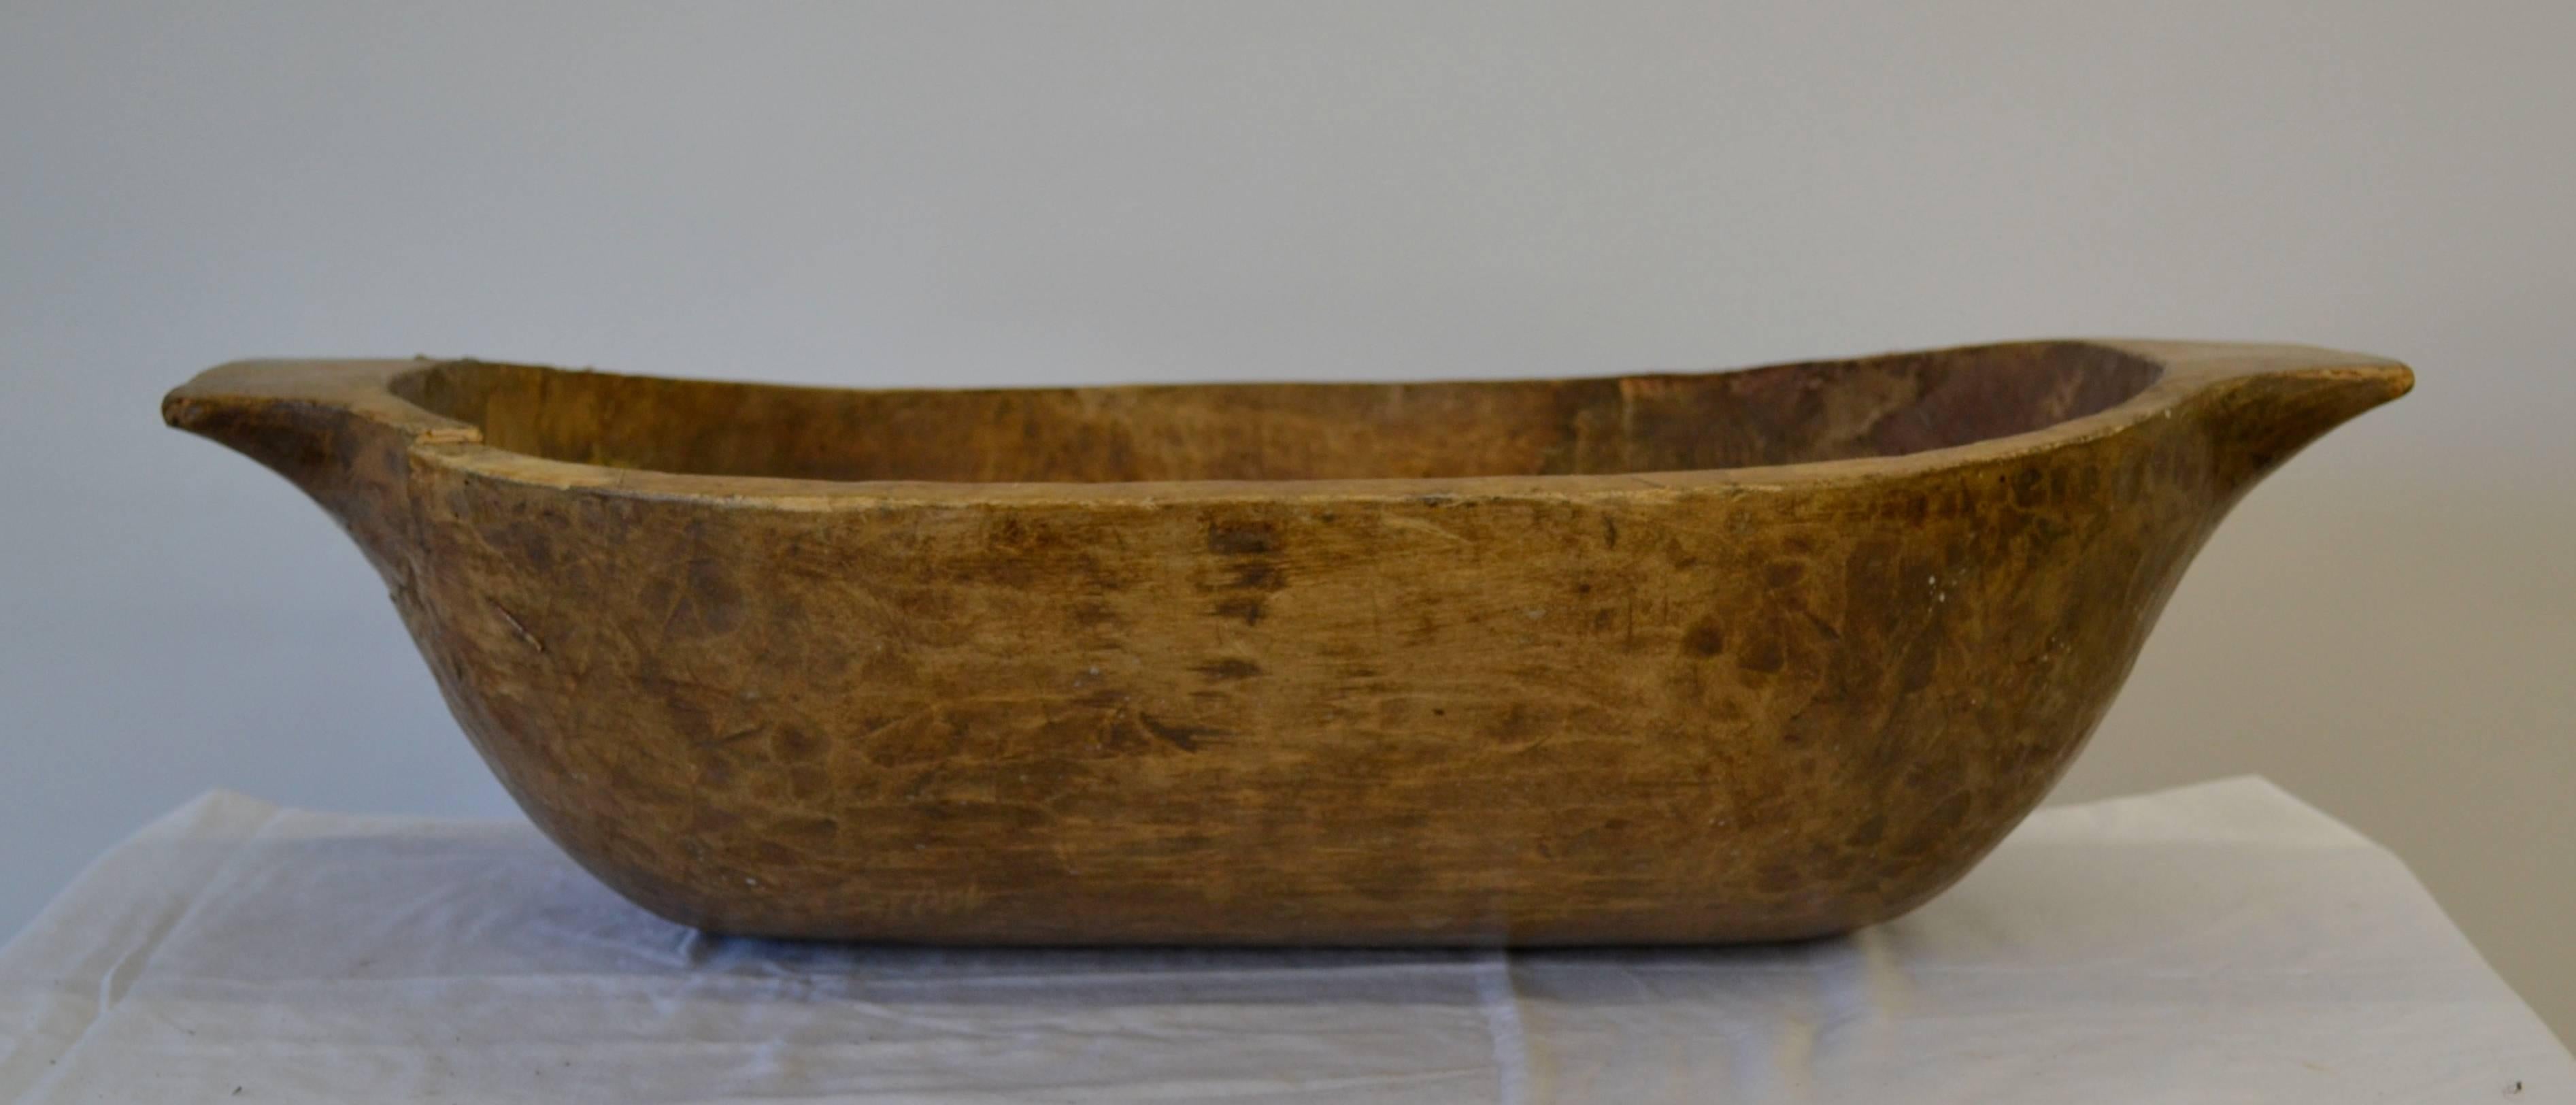 An attractive antique dough bowl or trog, hand-carved from a split log.  Great as a centerpiece or as a catch-all by the door to toss in scarves and gloves, or use for keeping kindling, logs, or magazines by the fire. 